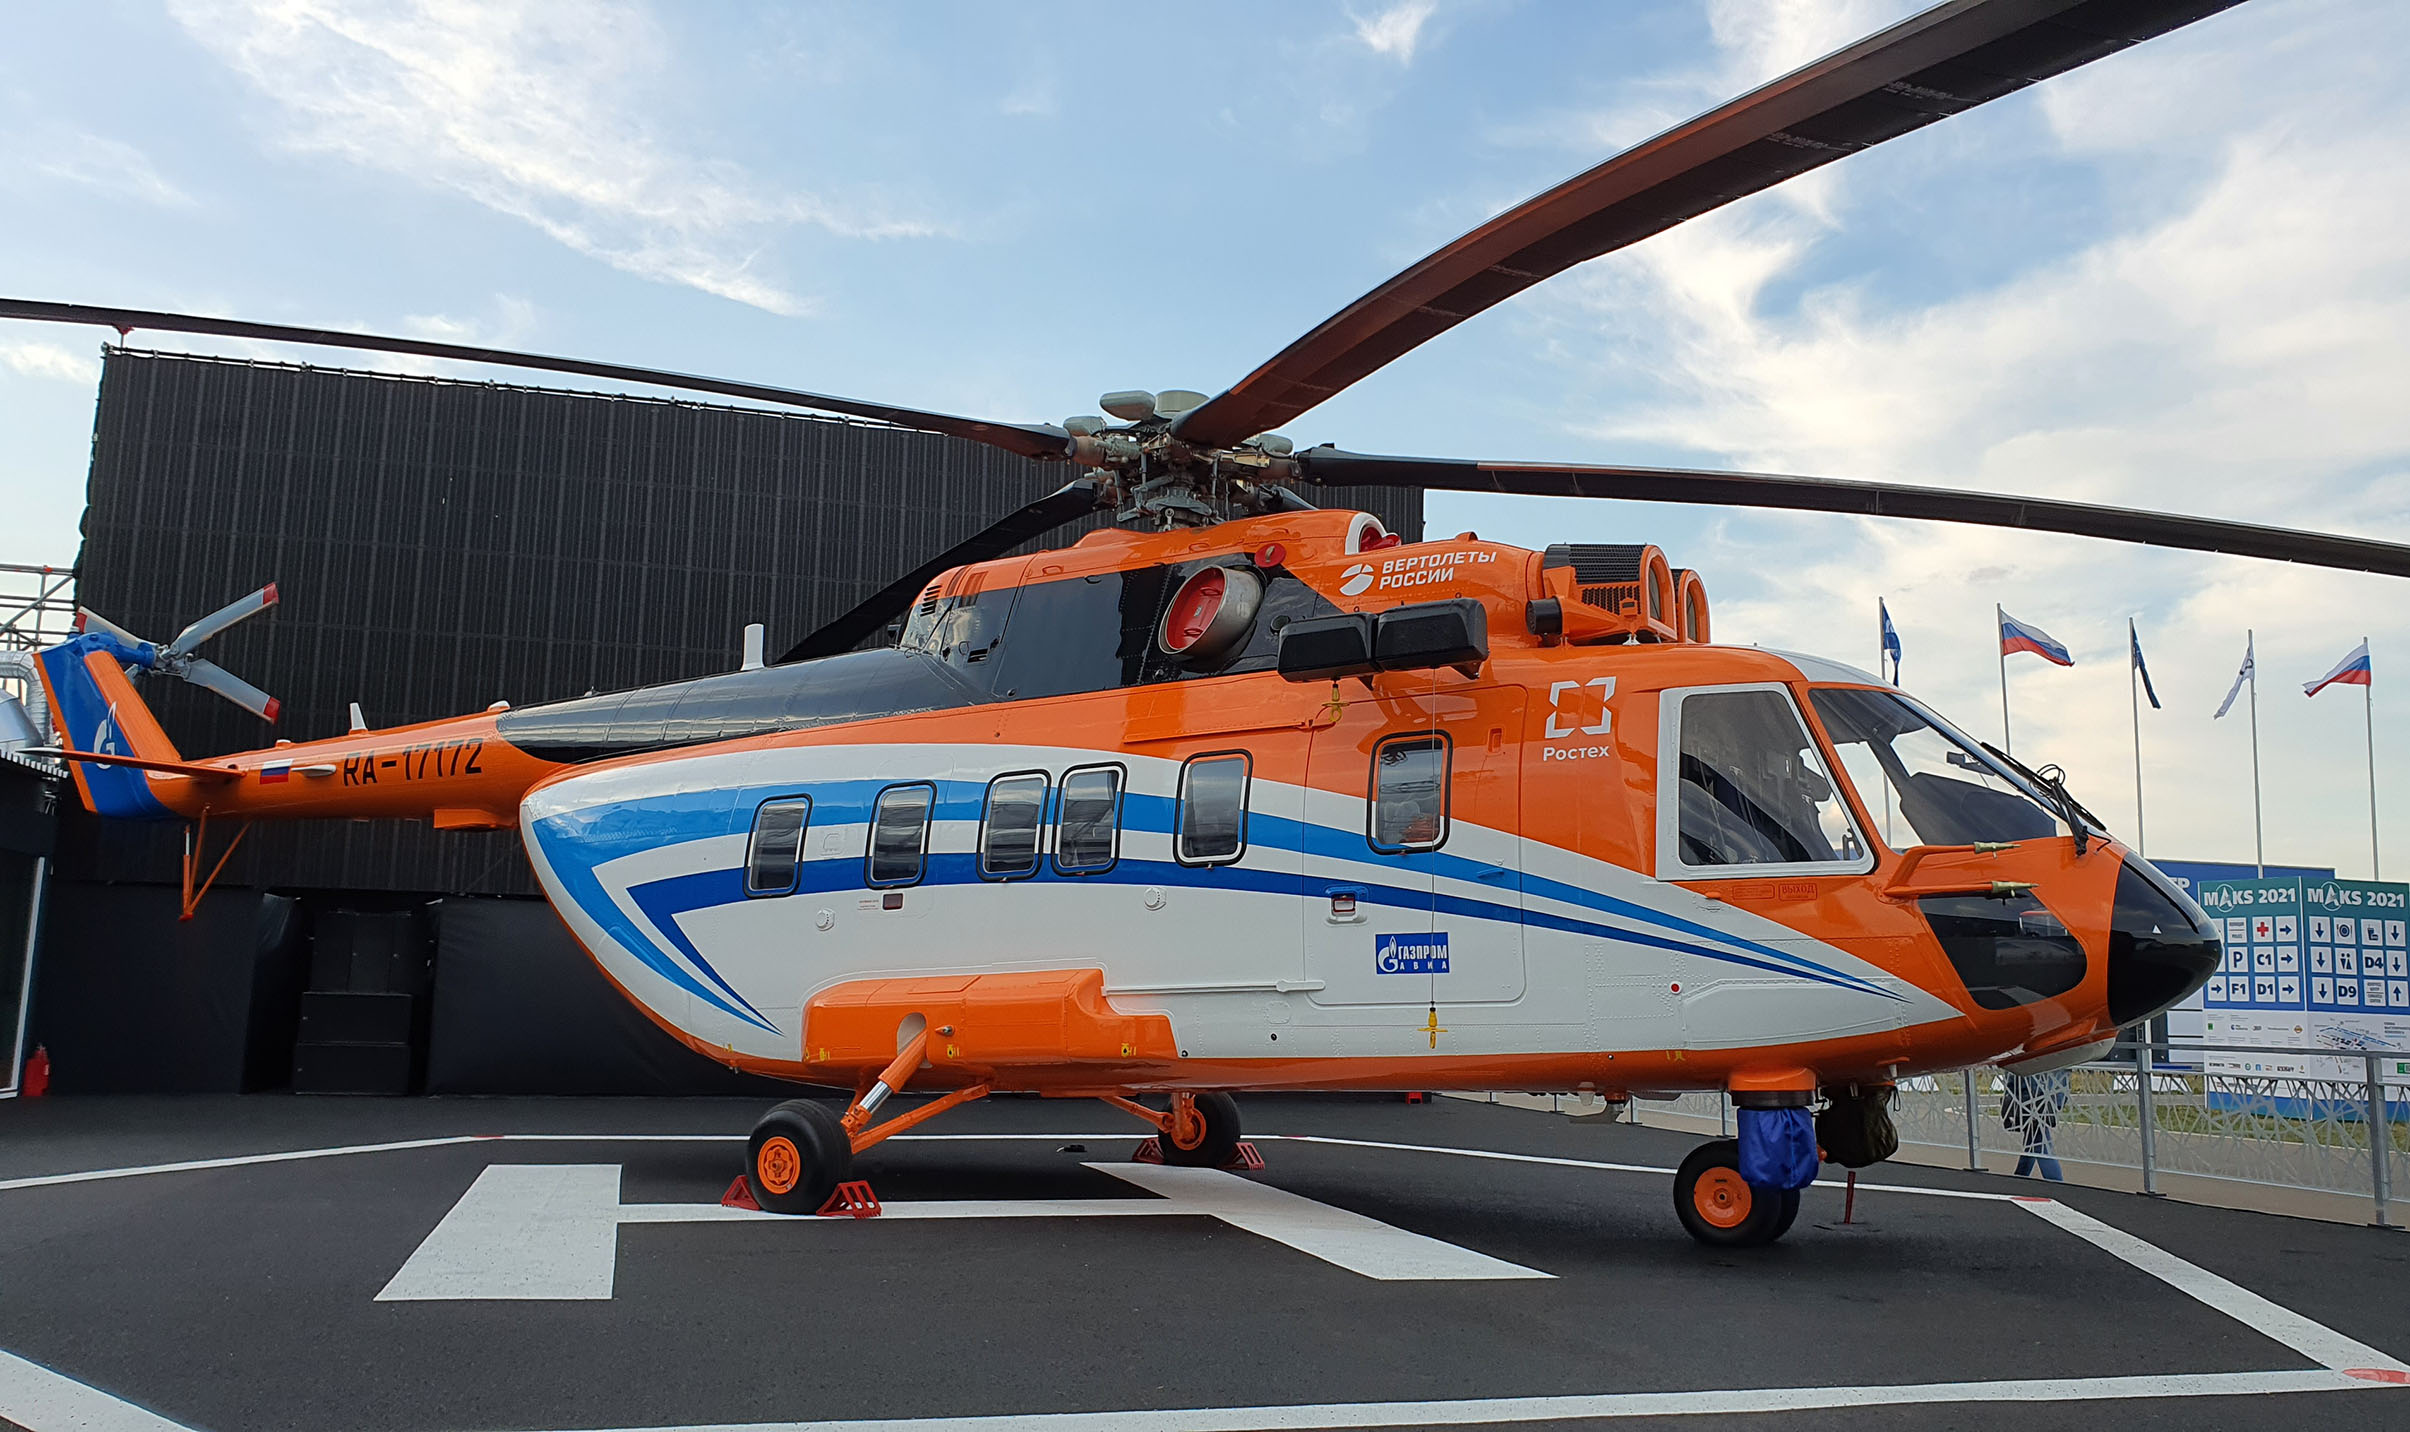 Russian Helicopters and Gazprom agree offshore helicopter deal